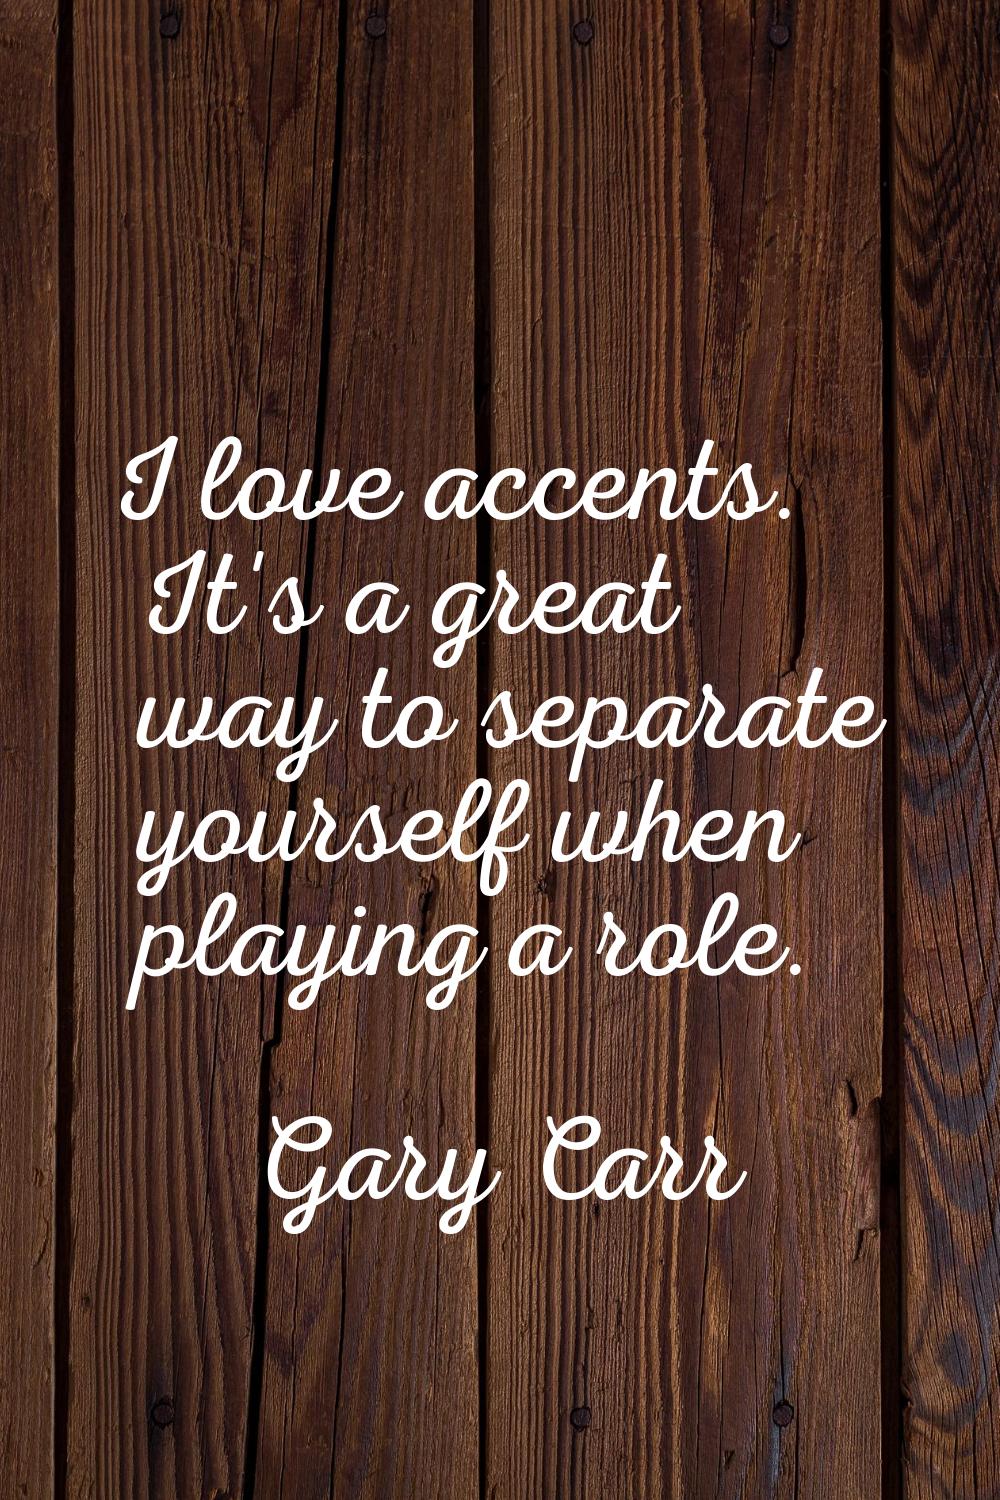 I love accents. It's a great way to separate yourself when playing a role.